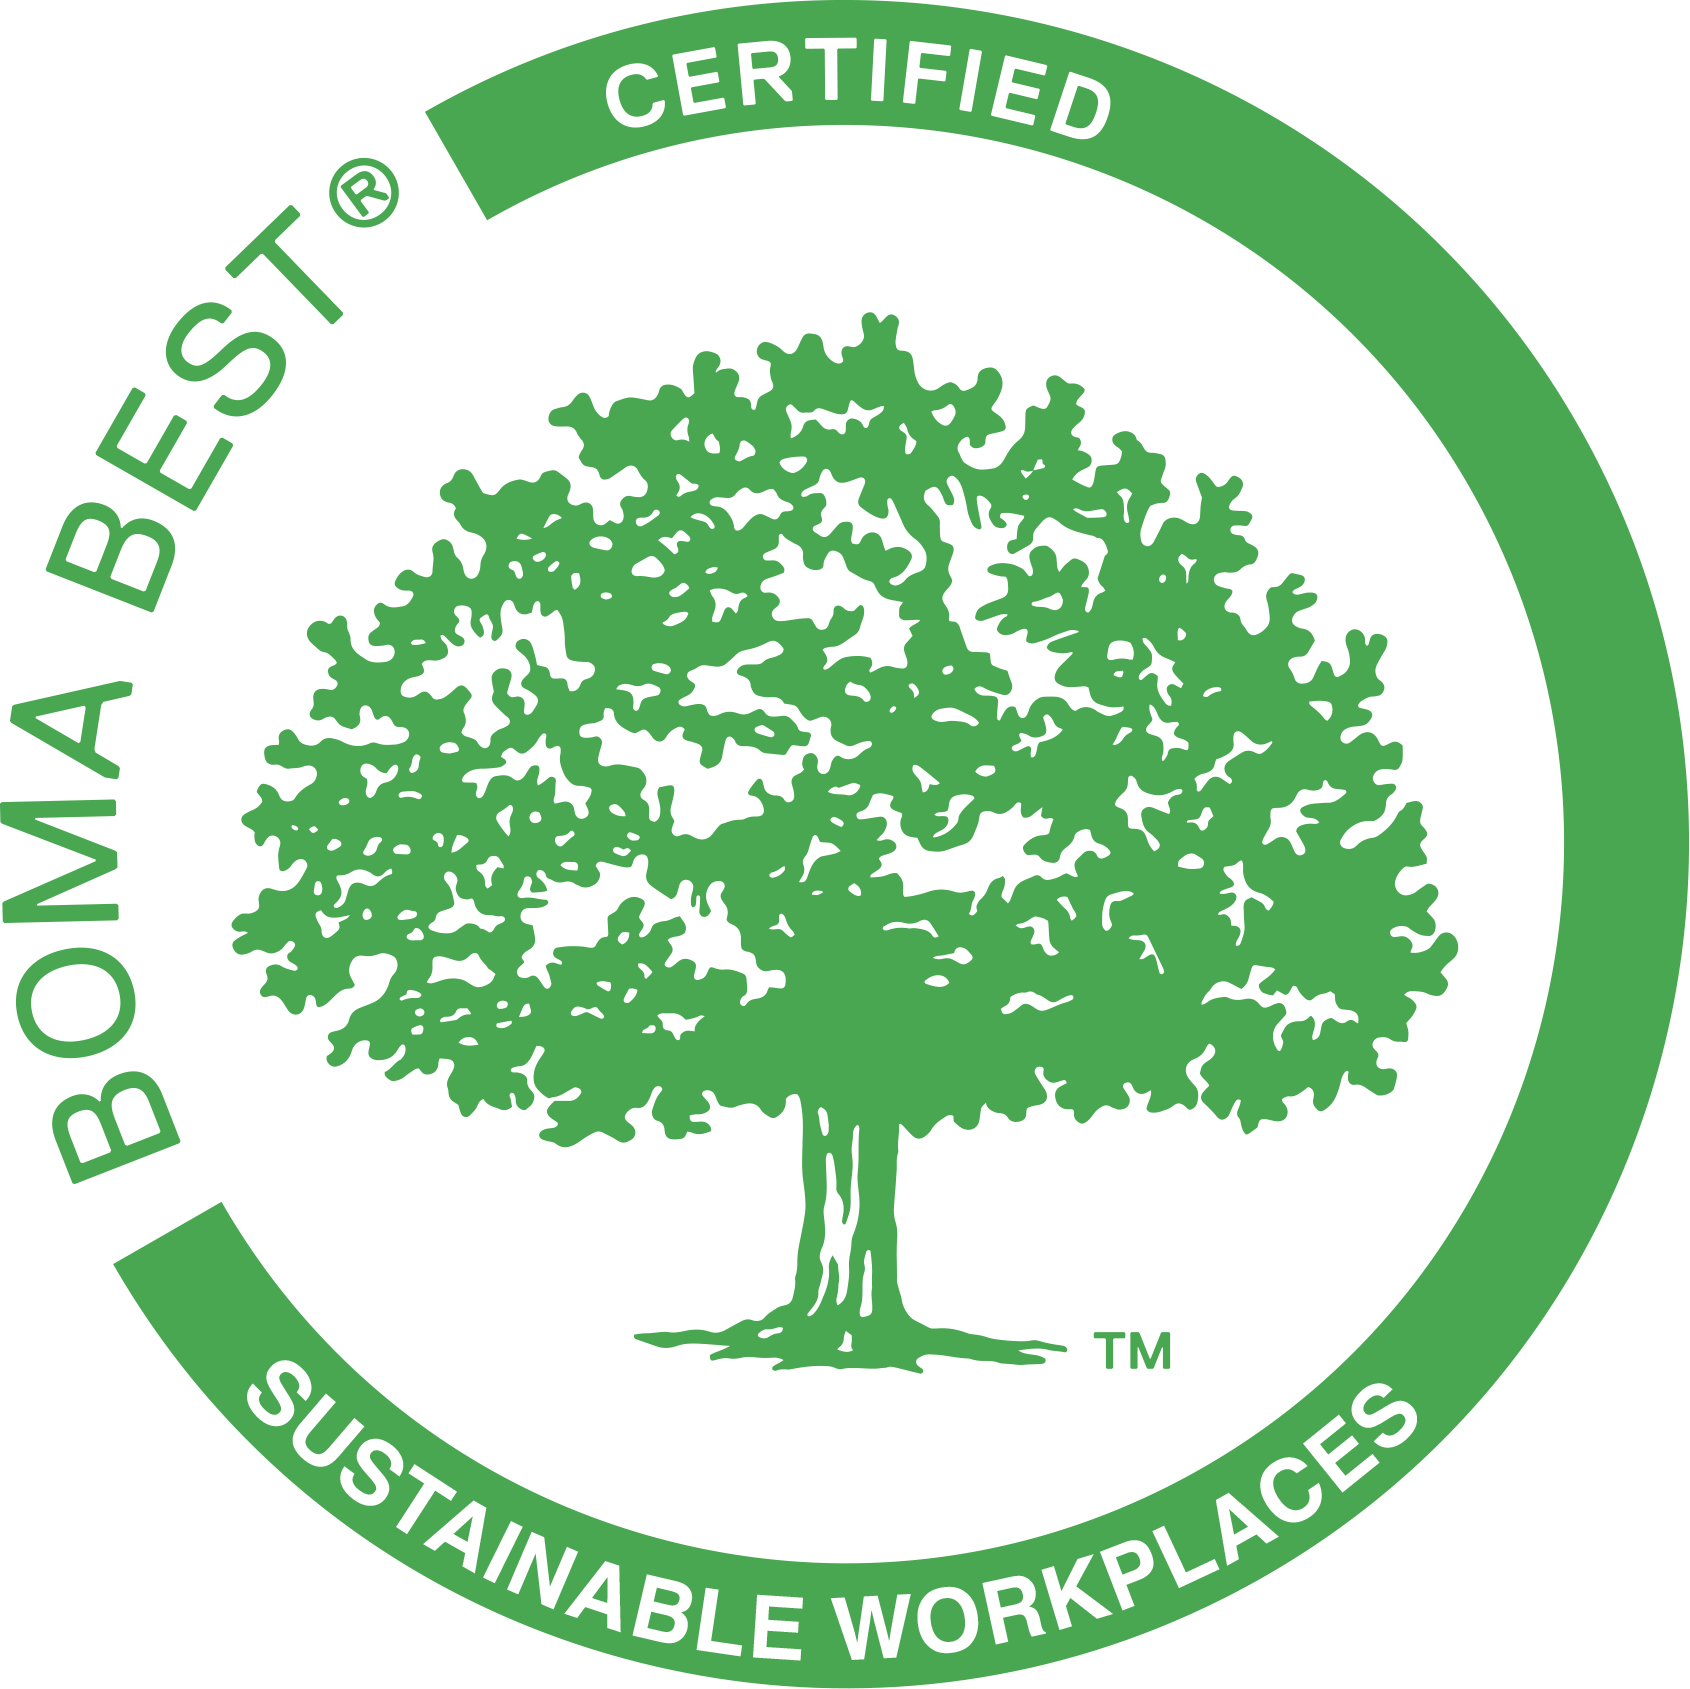 boma-best_certified_english_pms_tm (2).png